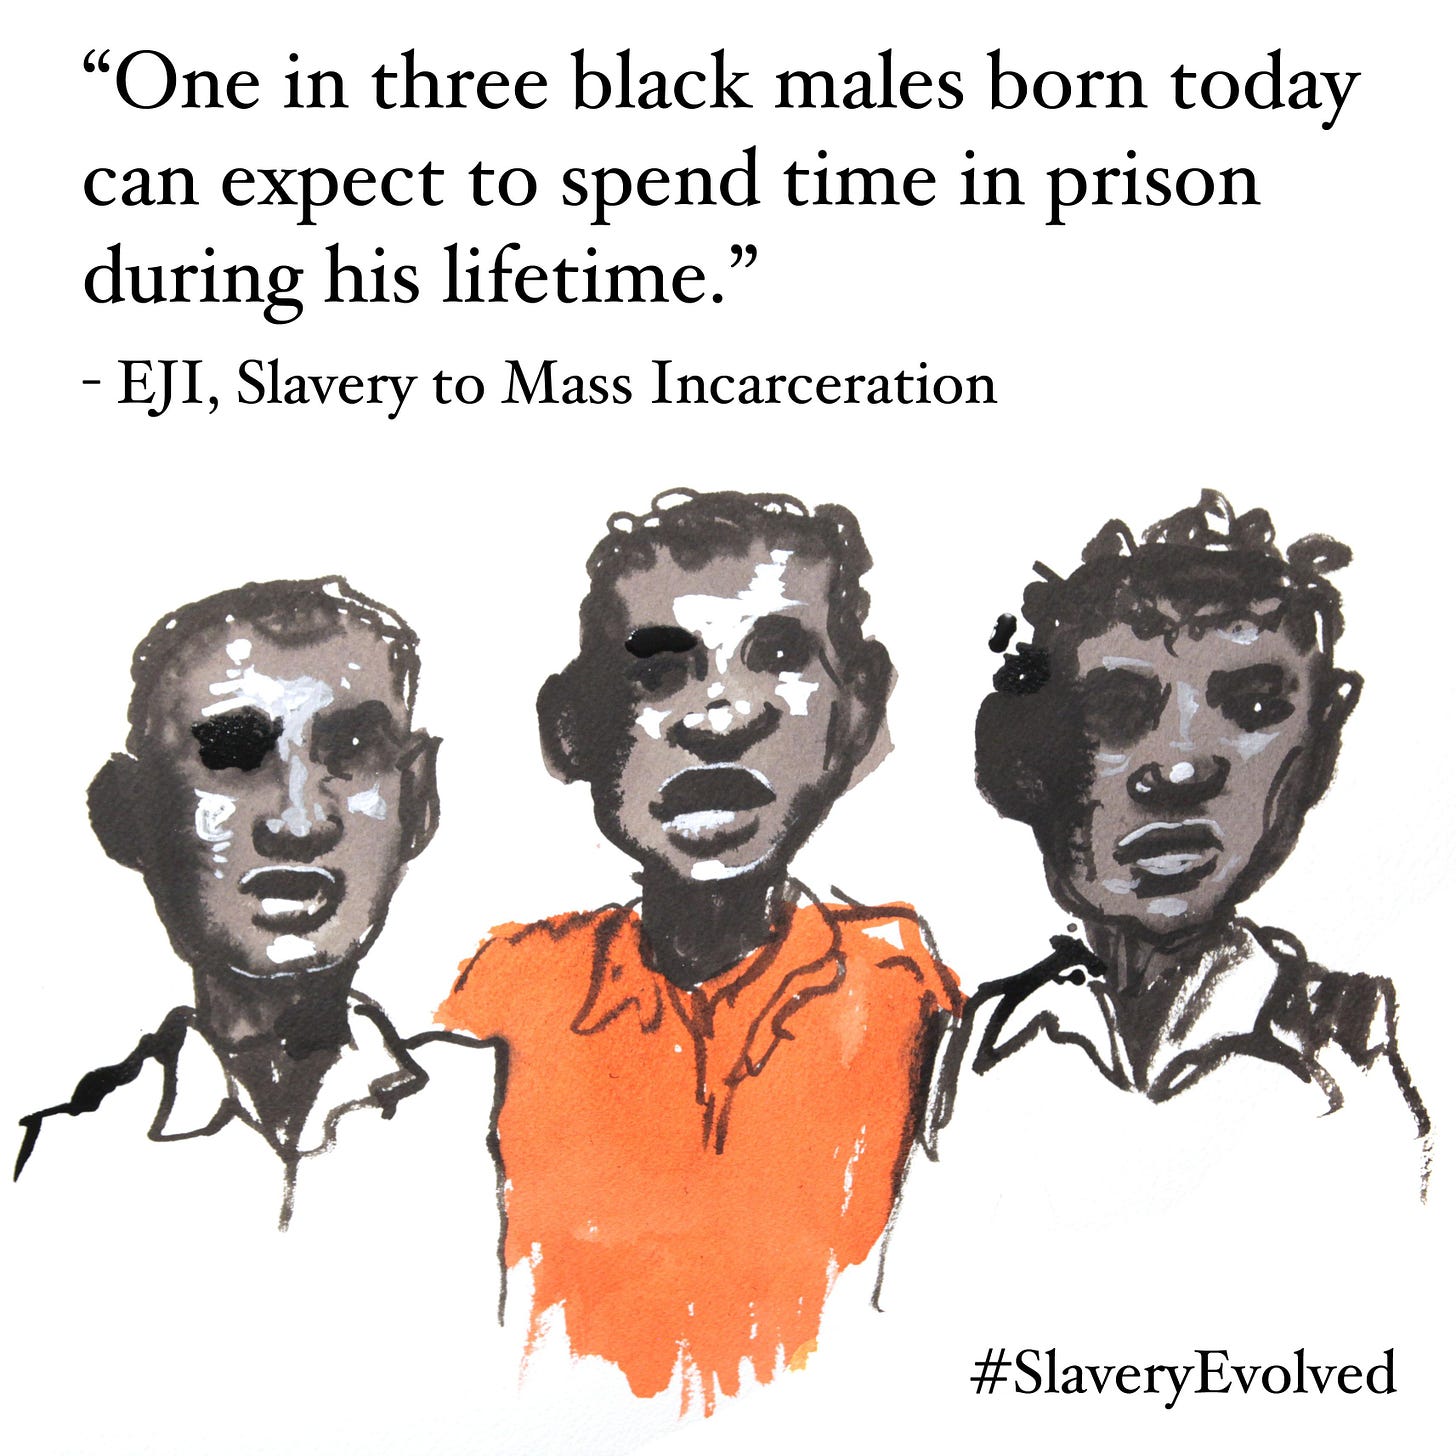 Equal Justice Initiative on Twitter: "1 in 3 black males born today can  expect to spend time in prison in his life. http://t.co/6weQ6wezDg  #SlaveryEvolved http://t.co/J5zFOtcWuv" / Twitter